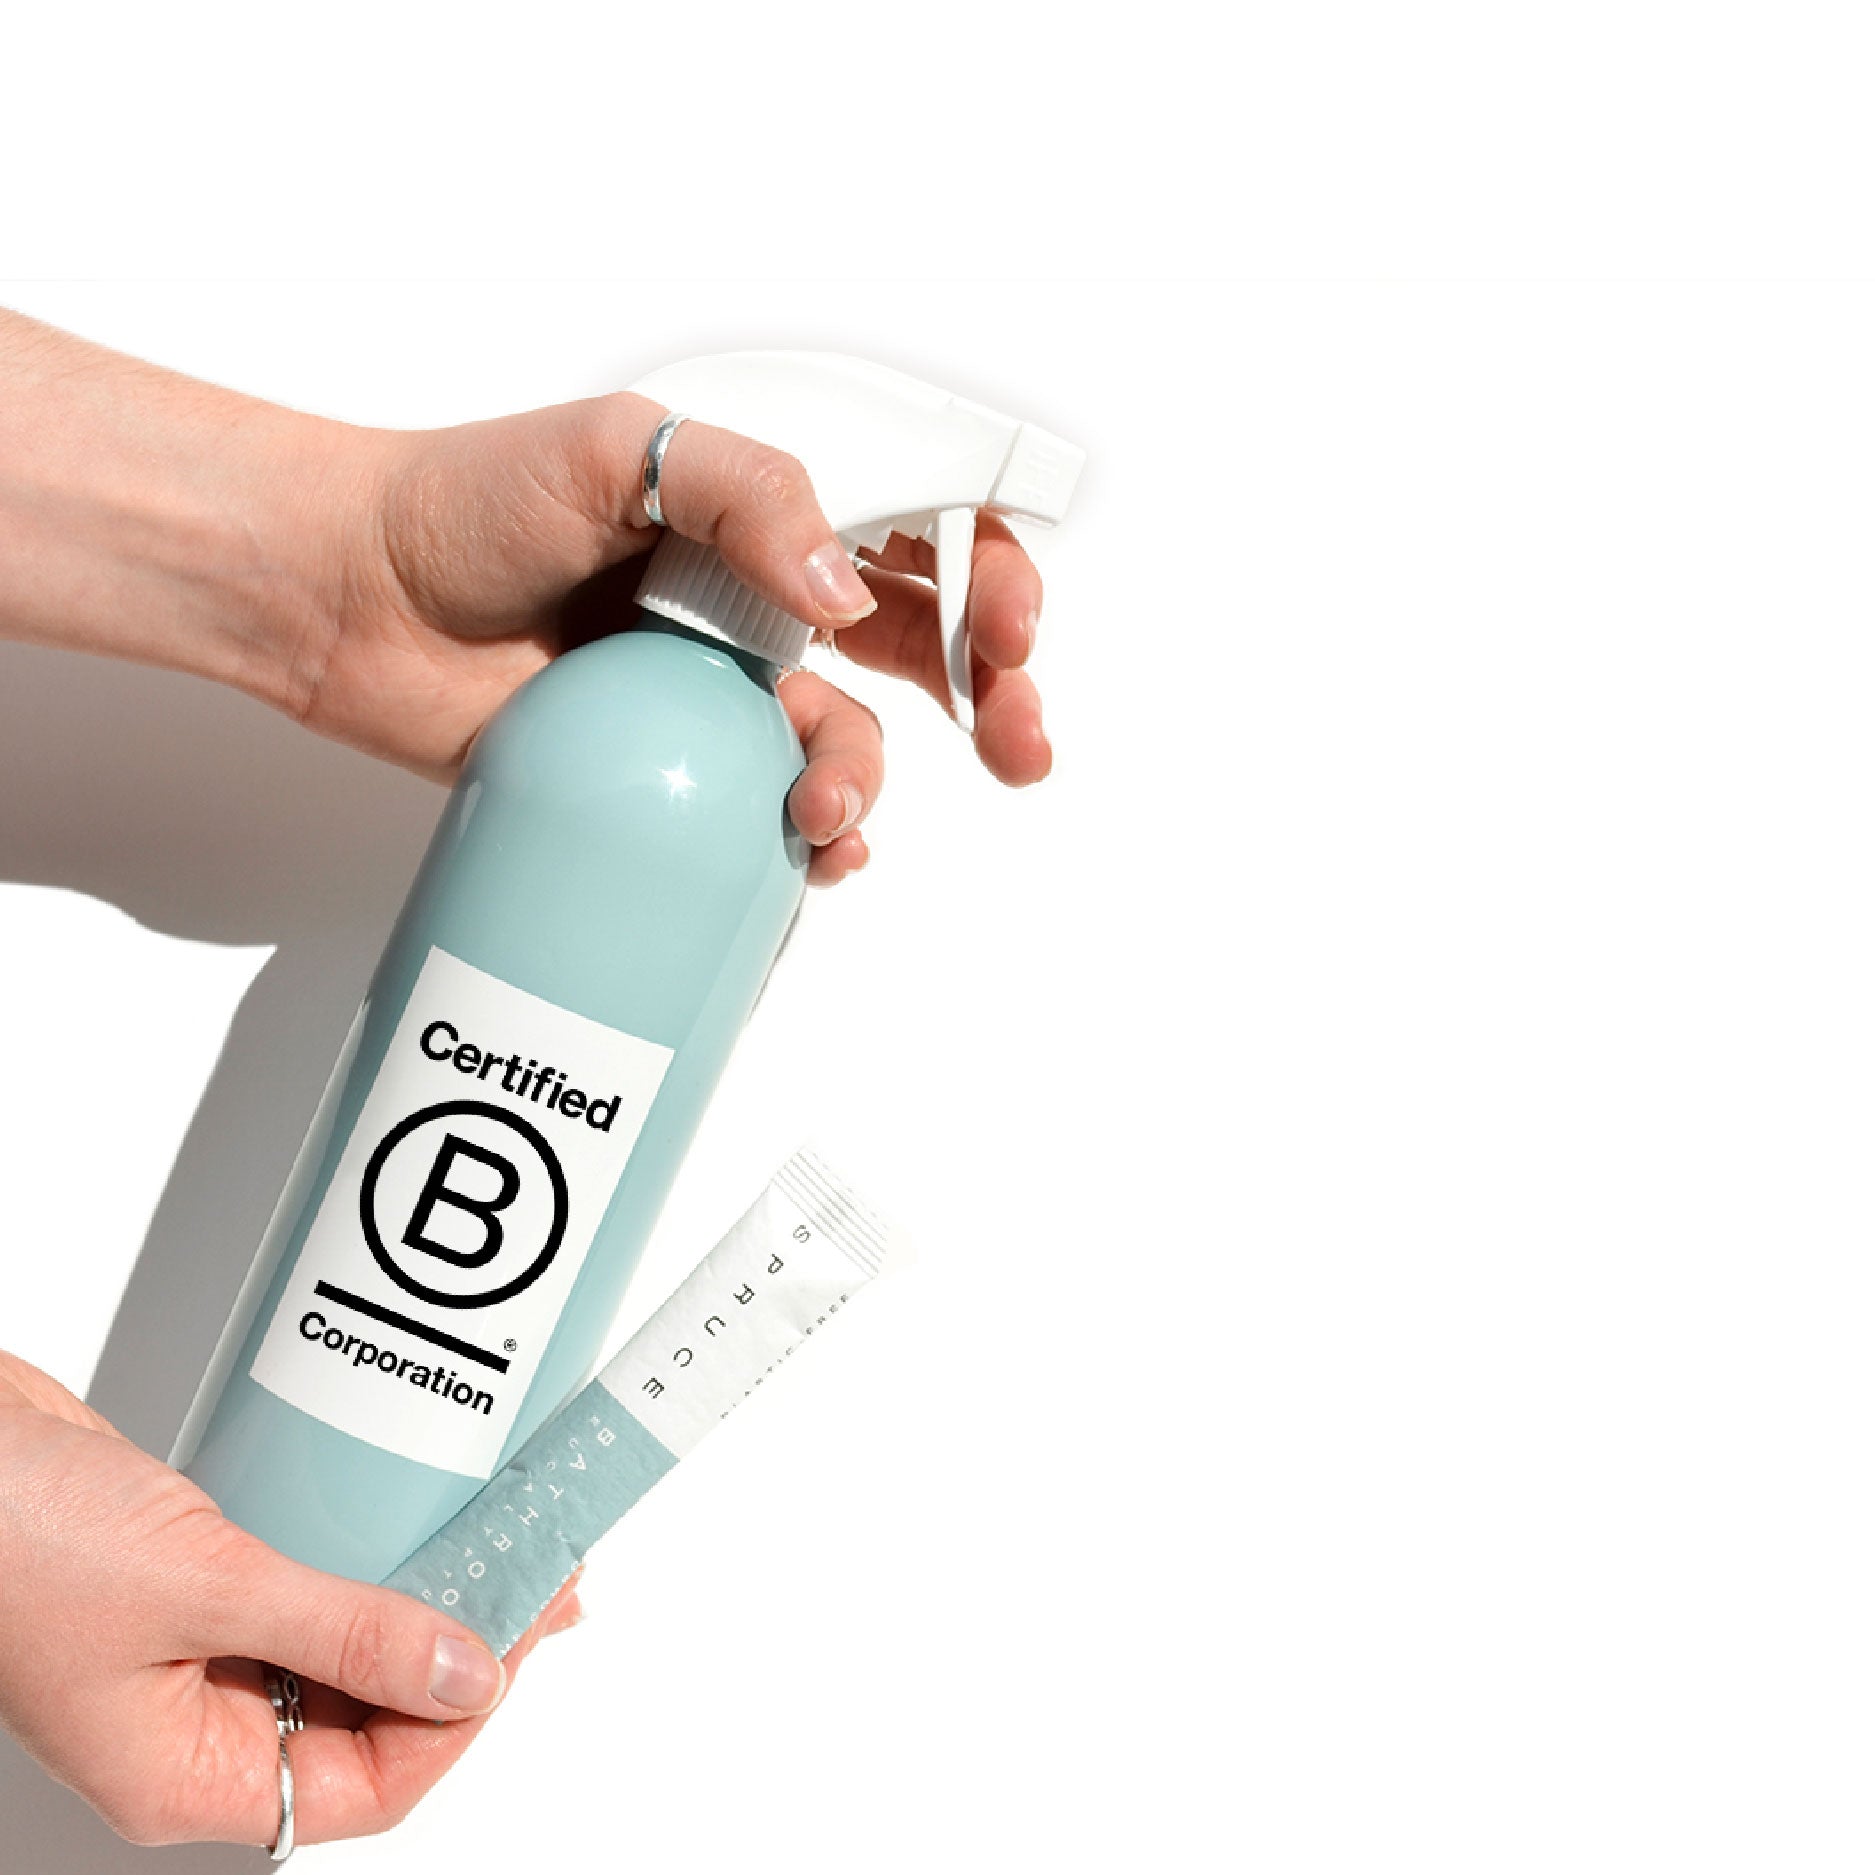 sustainable cleaning spray from a certified b corporation